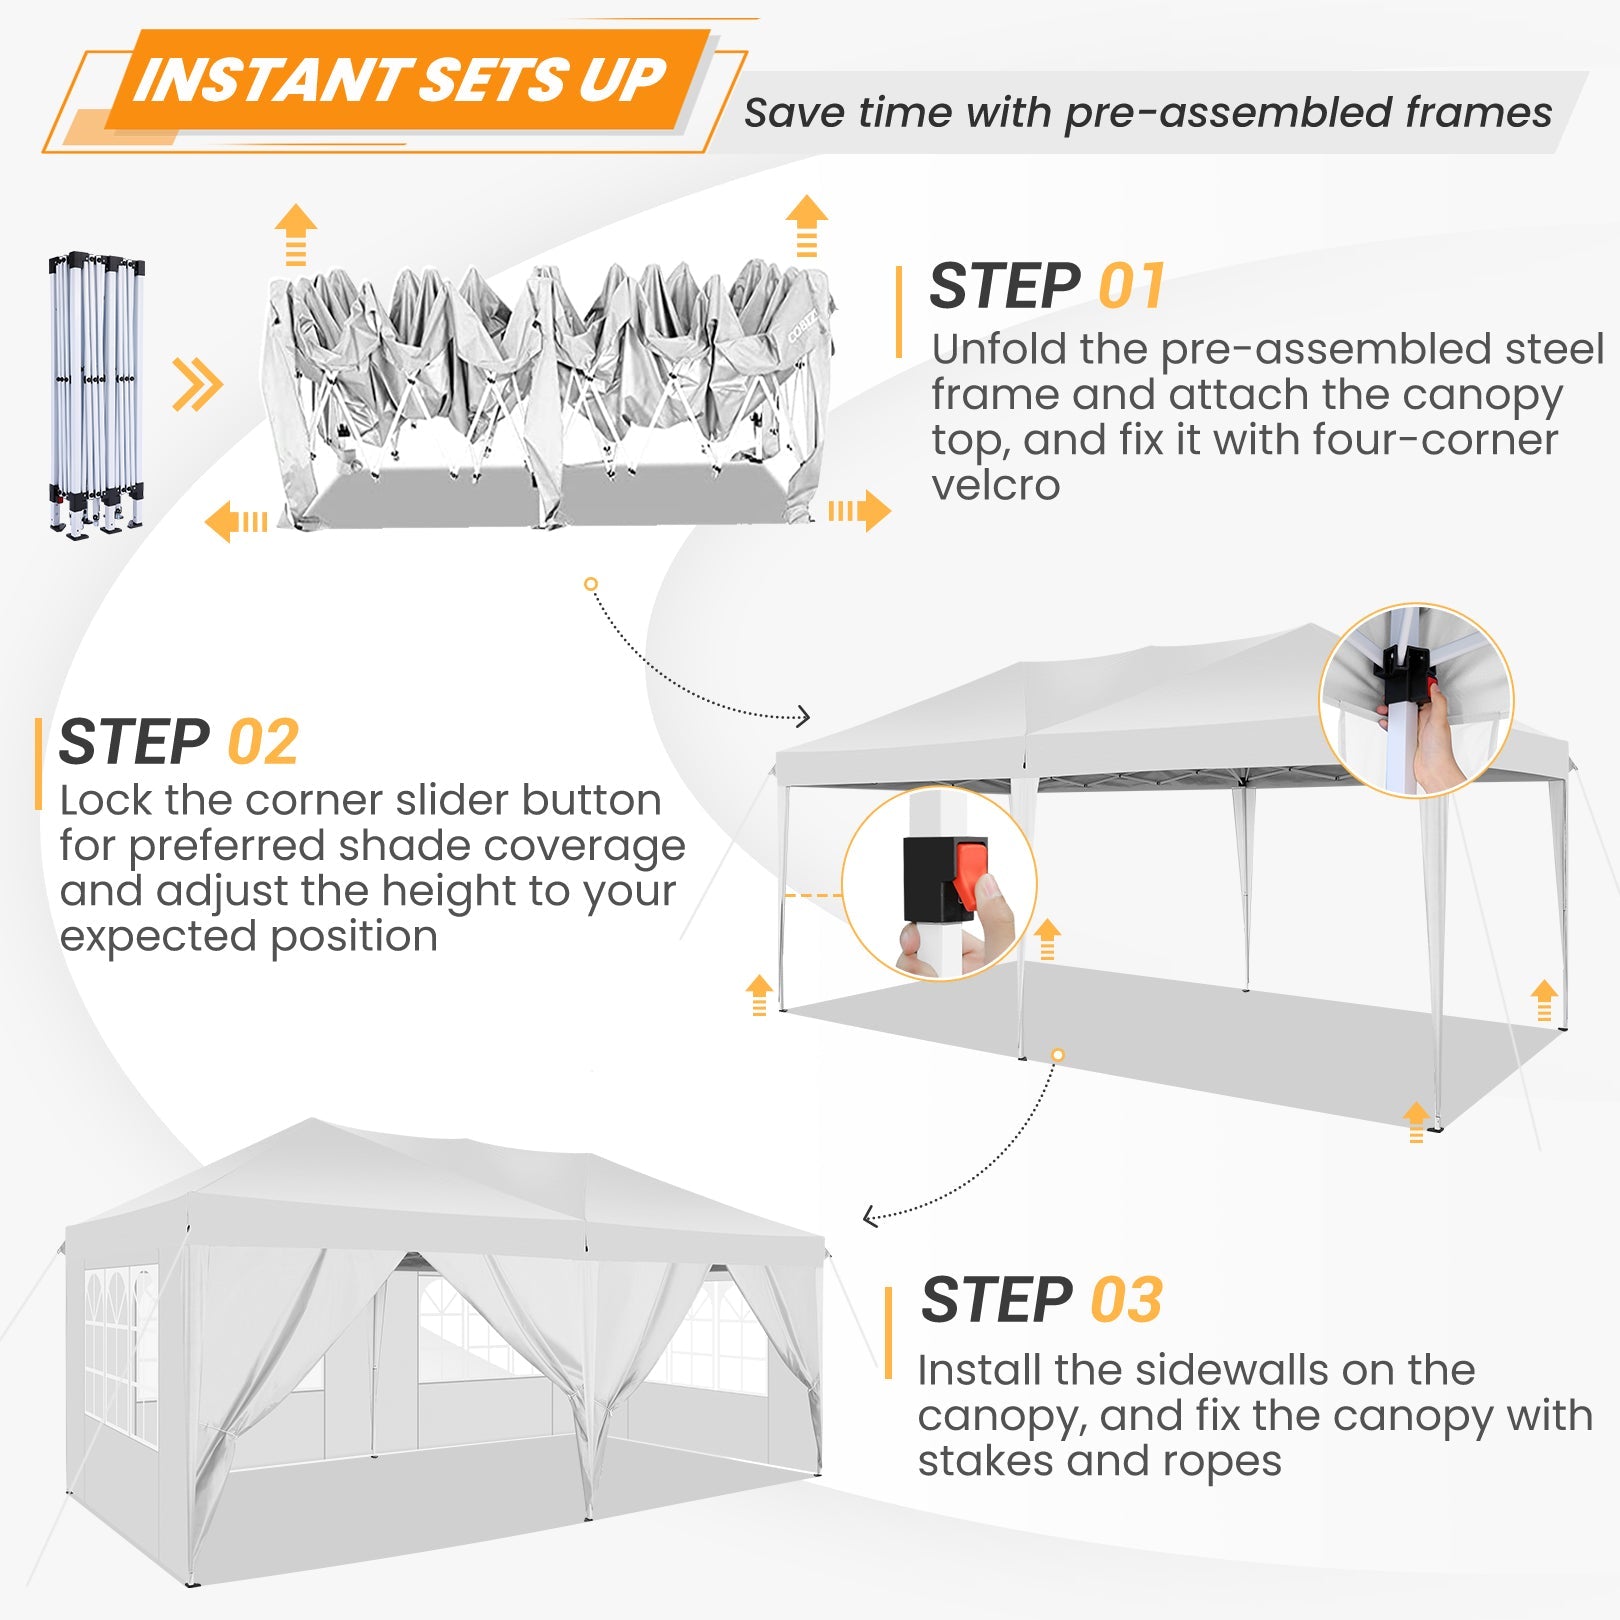 10' x 20' Outdoor Canopy Tent EZ Pop Up Backyard Canopy Portable Party Commercial Instant Canopy Shelter Tent Gazebo with 6 Removable Sidewalls & Carrying Bag for Wedding Picnics Camping, White